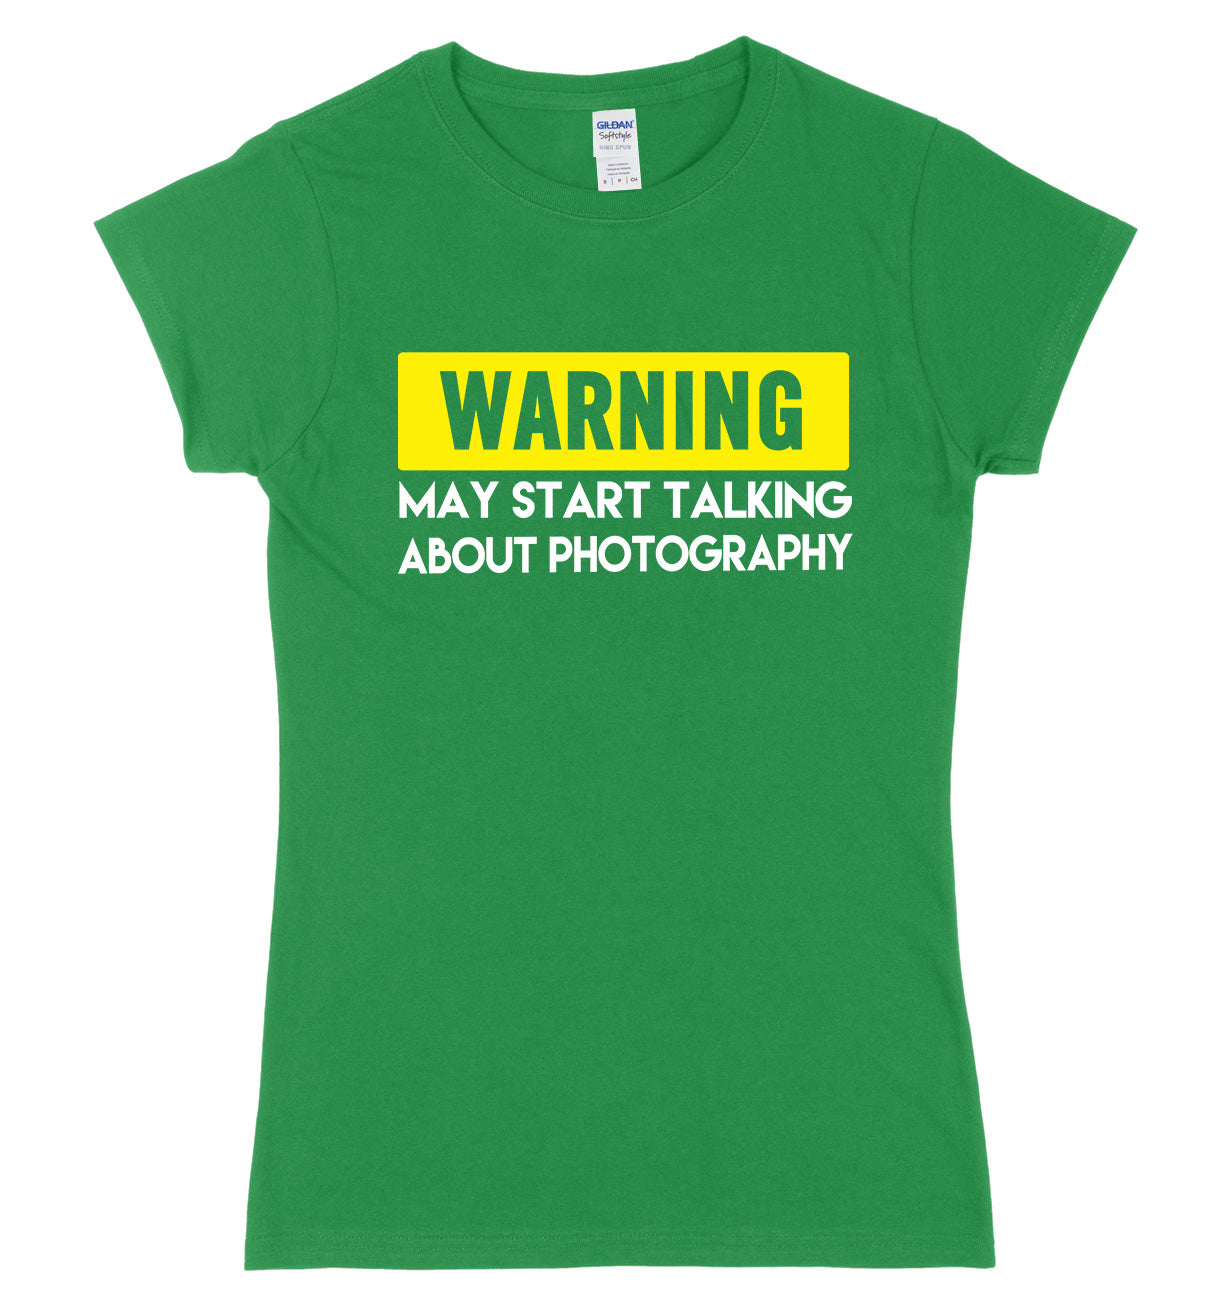 WARNING MAY START TALKING ABOUT PHOTOGRAPHY FUNNY WOMENS LADIES SLIM FIT  T-SHIRT